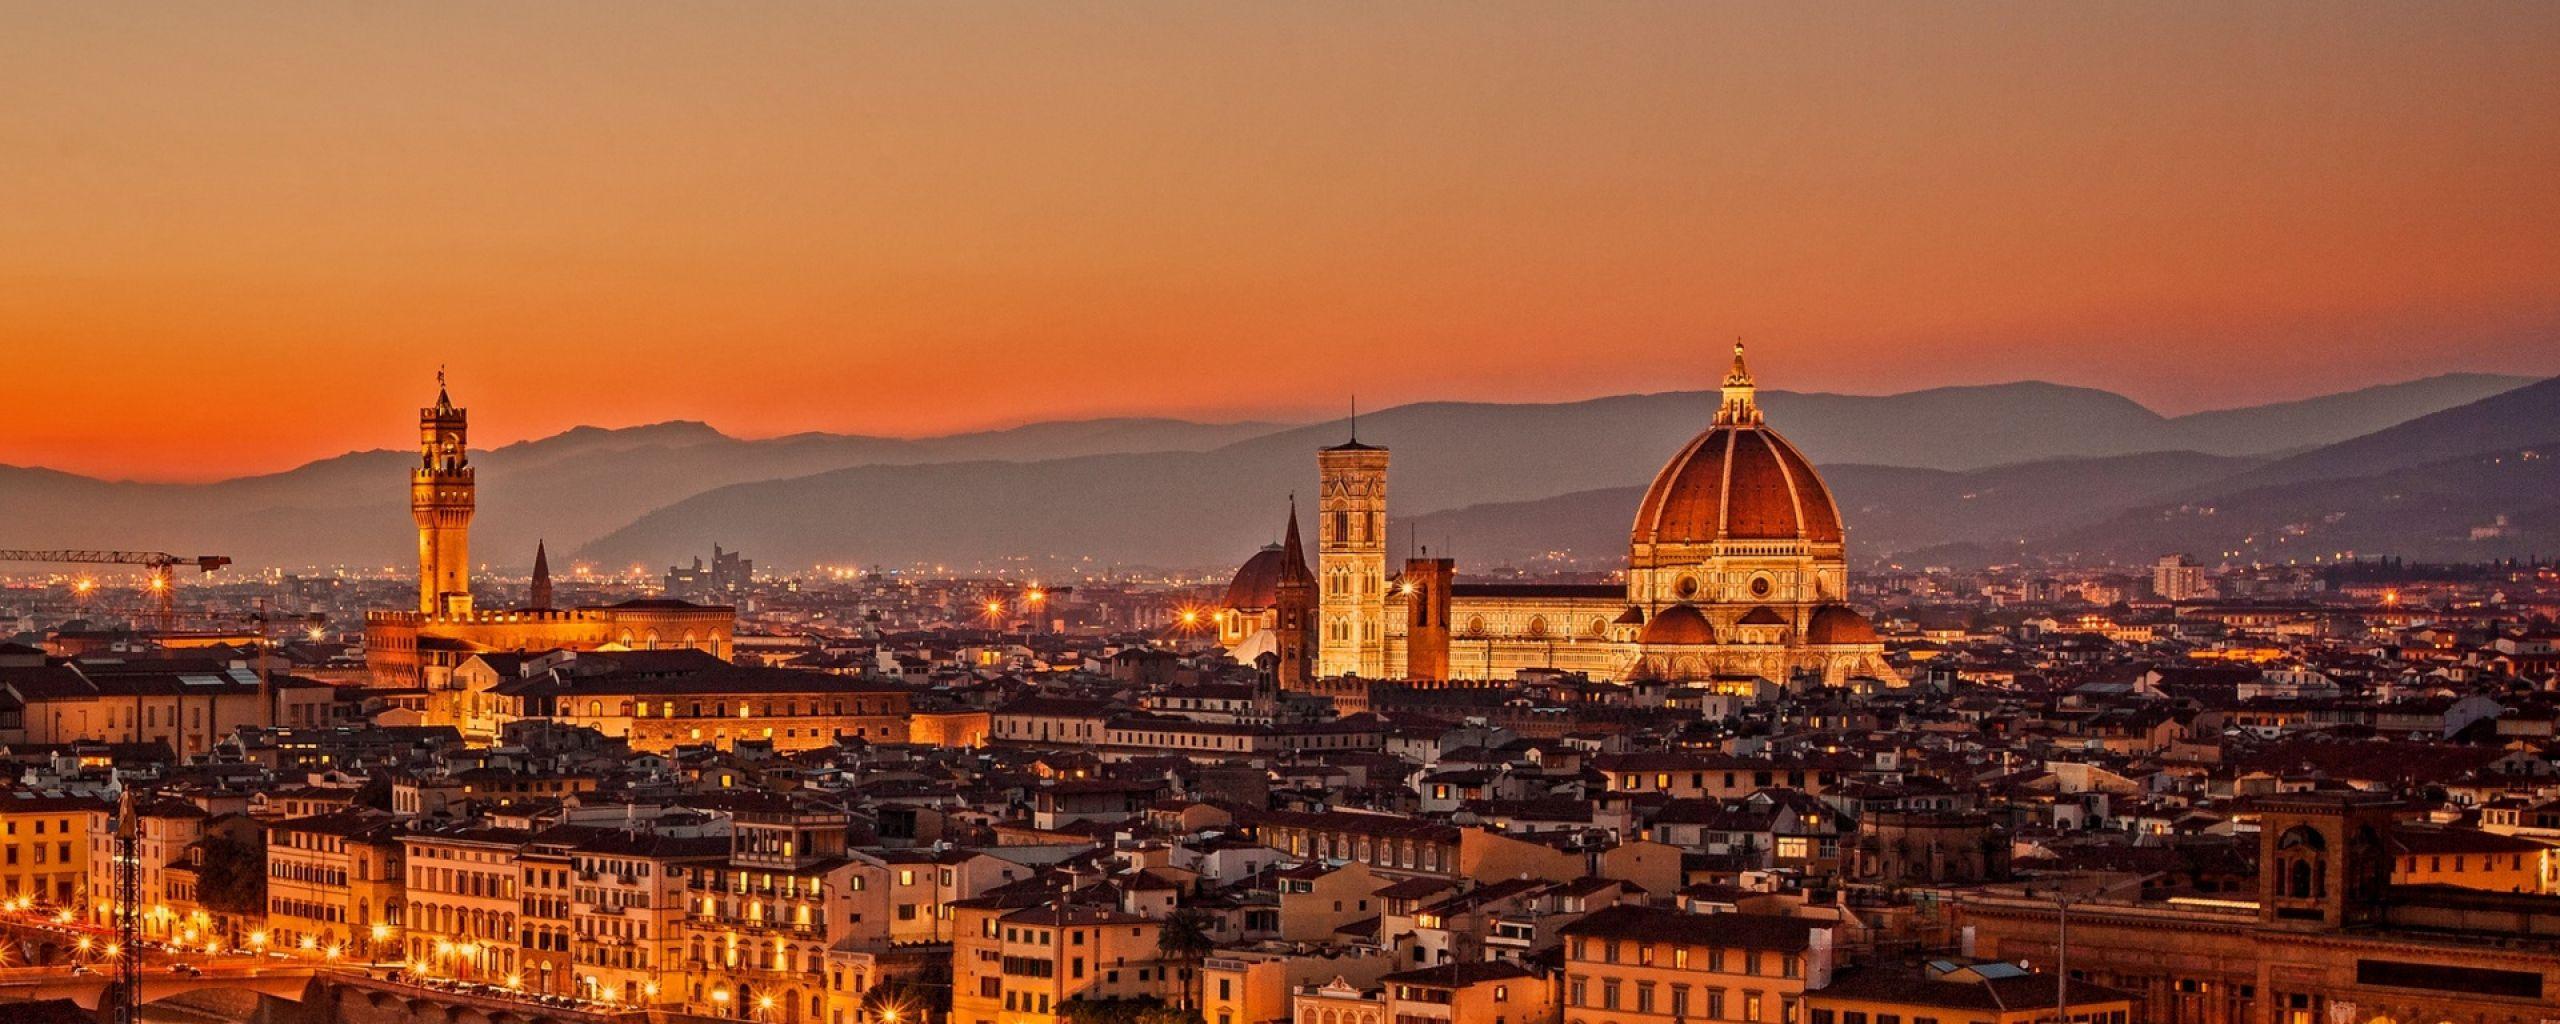 Florence 4K wallpapers for your desktop or mobile screen free and easy to  download